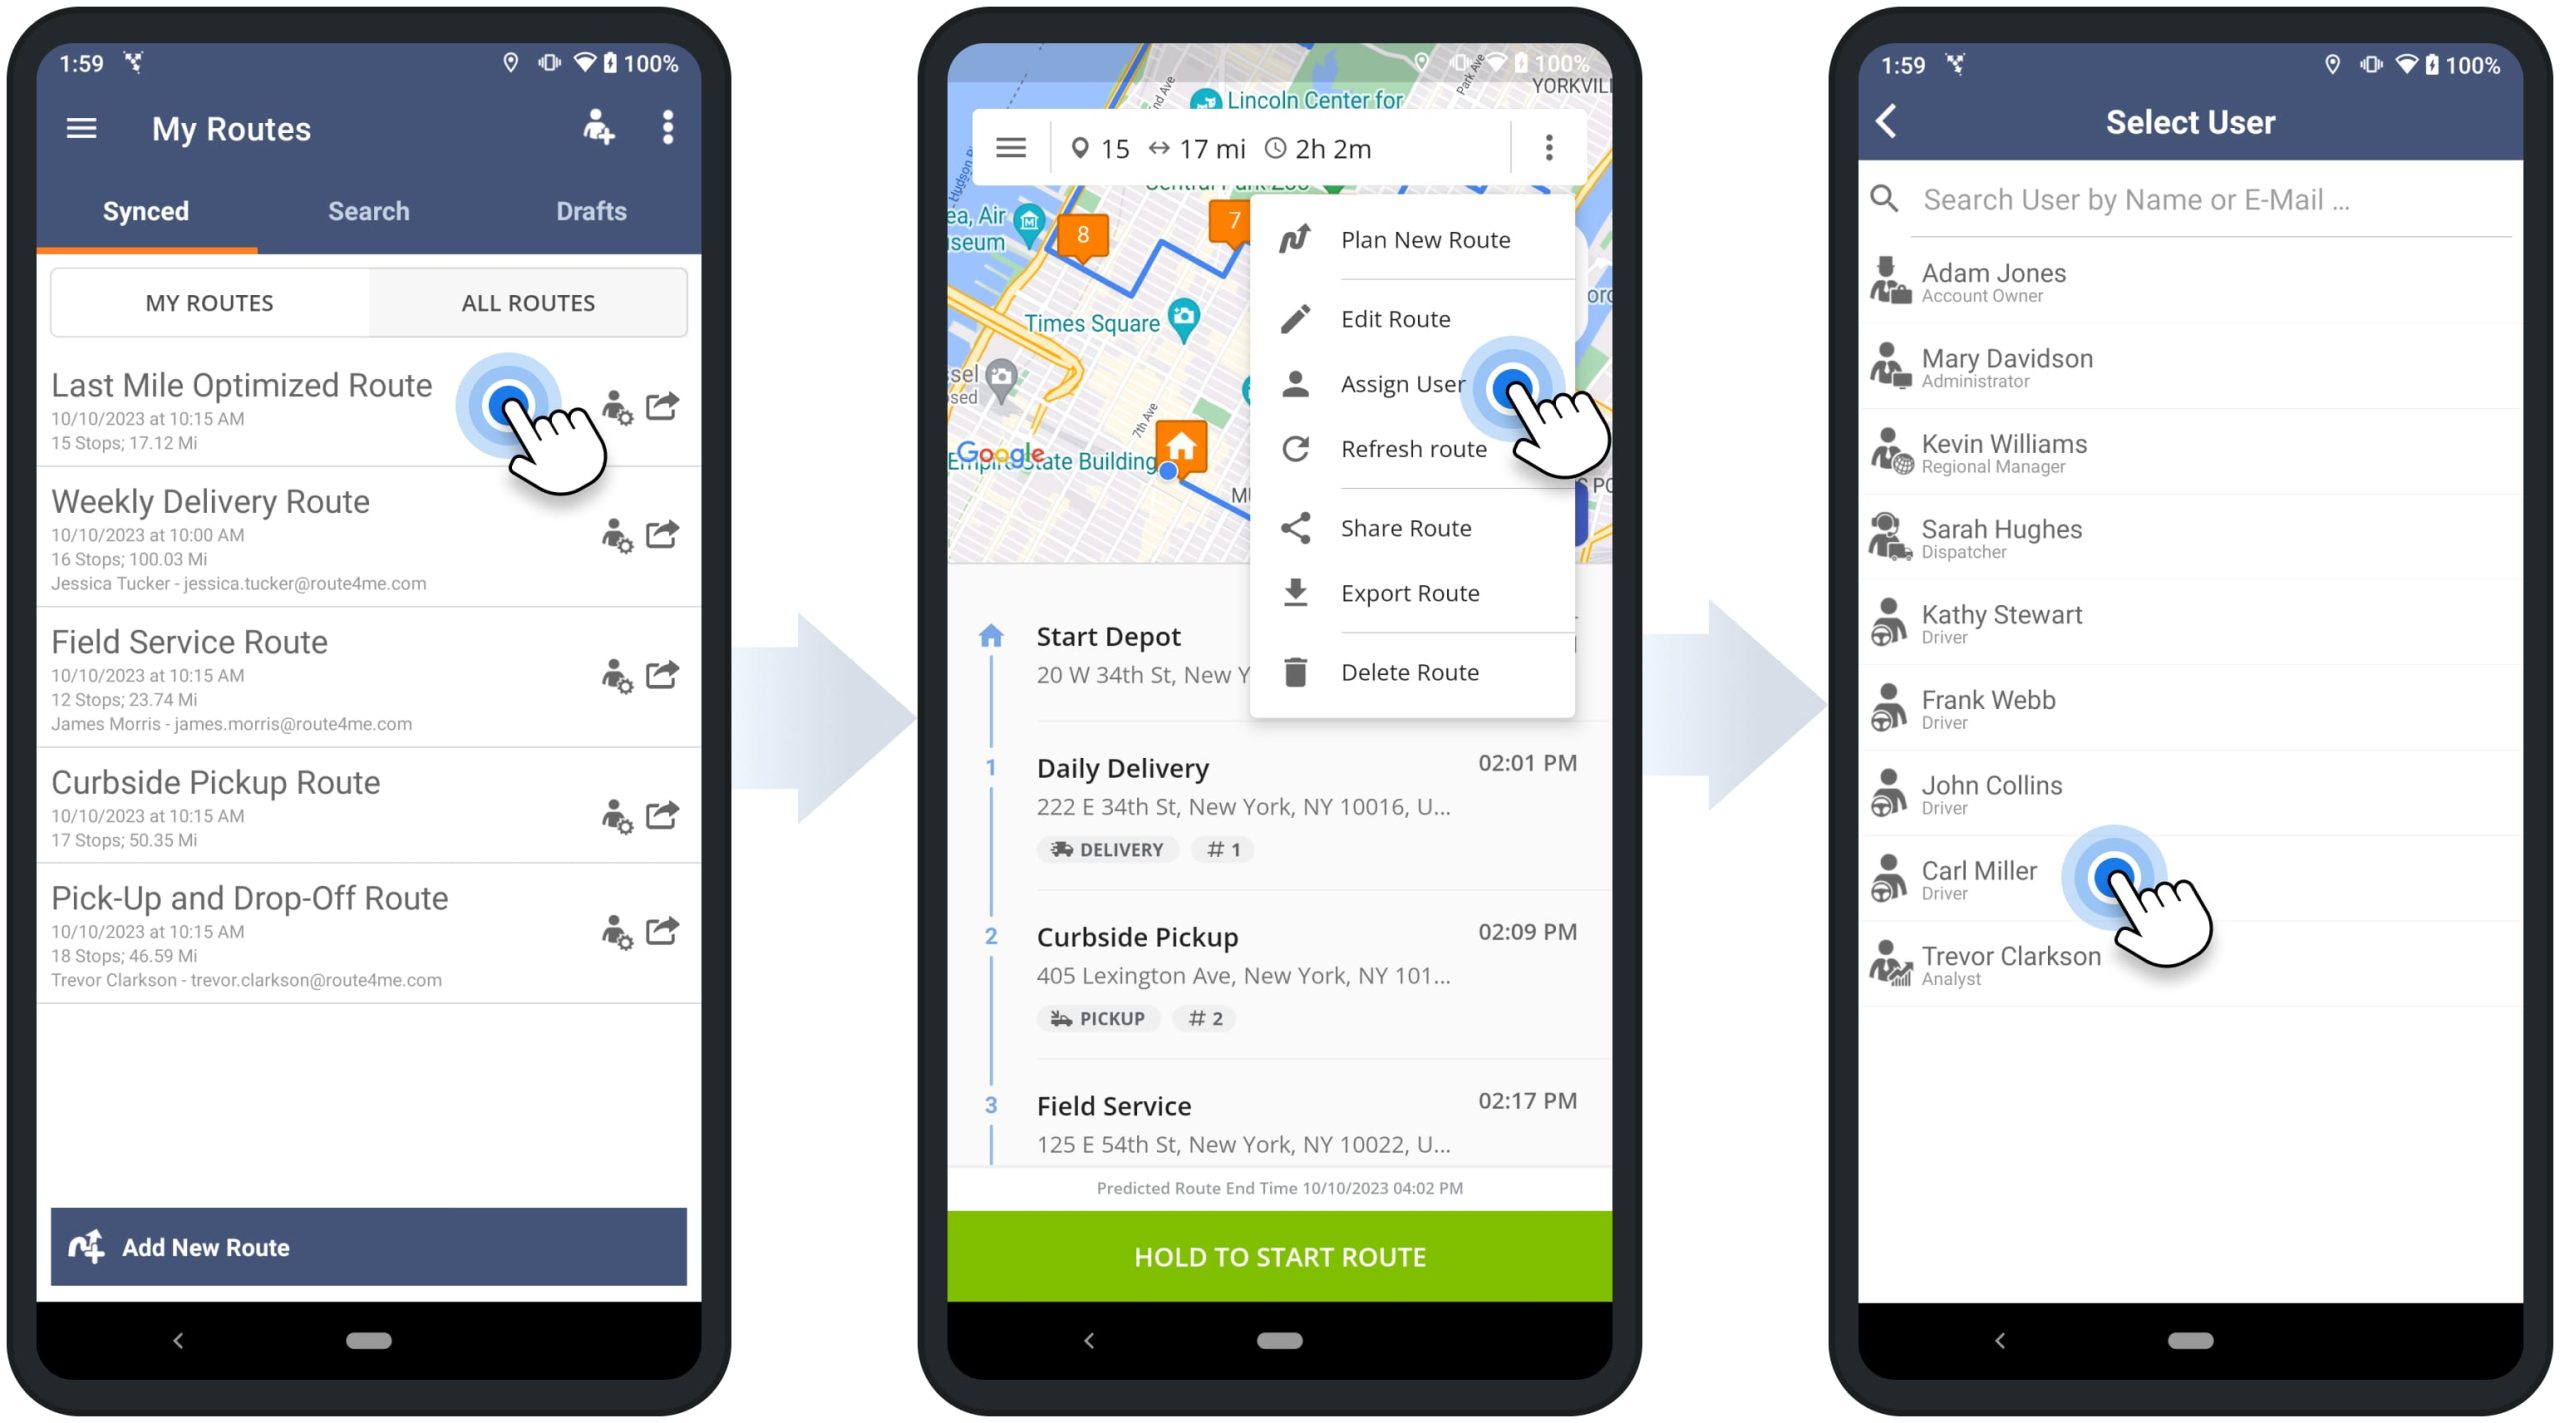 Open and dispatch routes to drivers, managers, route planners, and other team members using Route4Me's Android Route Planner app.